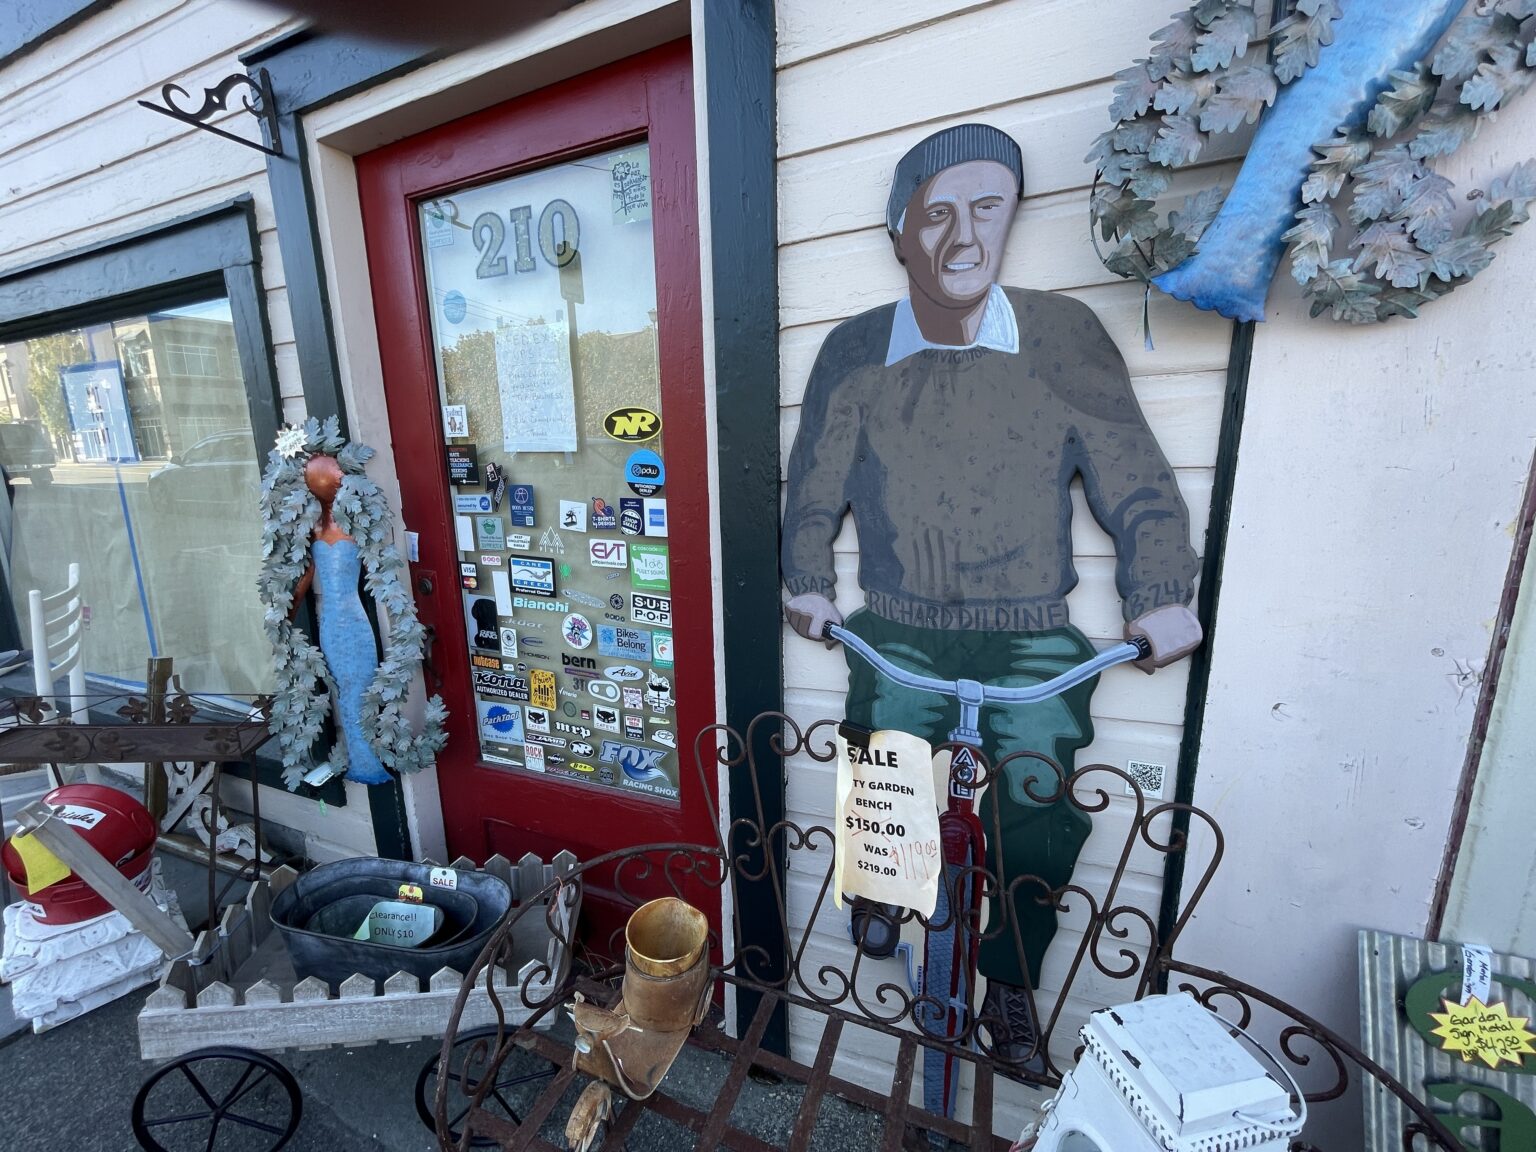 Outside of Alley Cat Antiques in downtown Anacortes